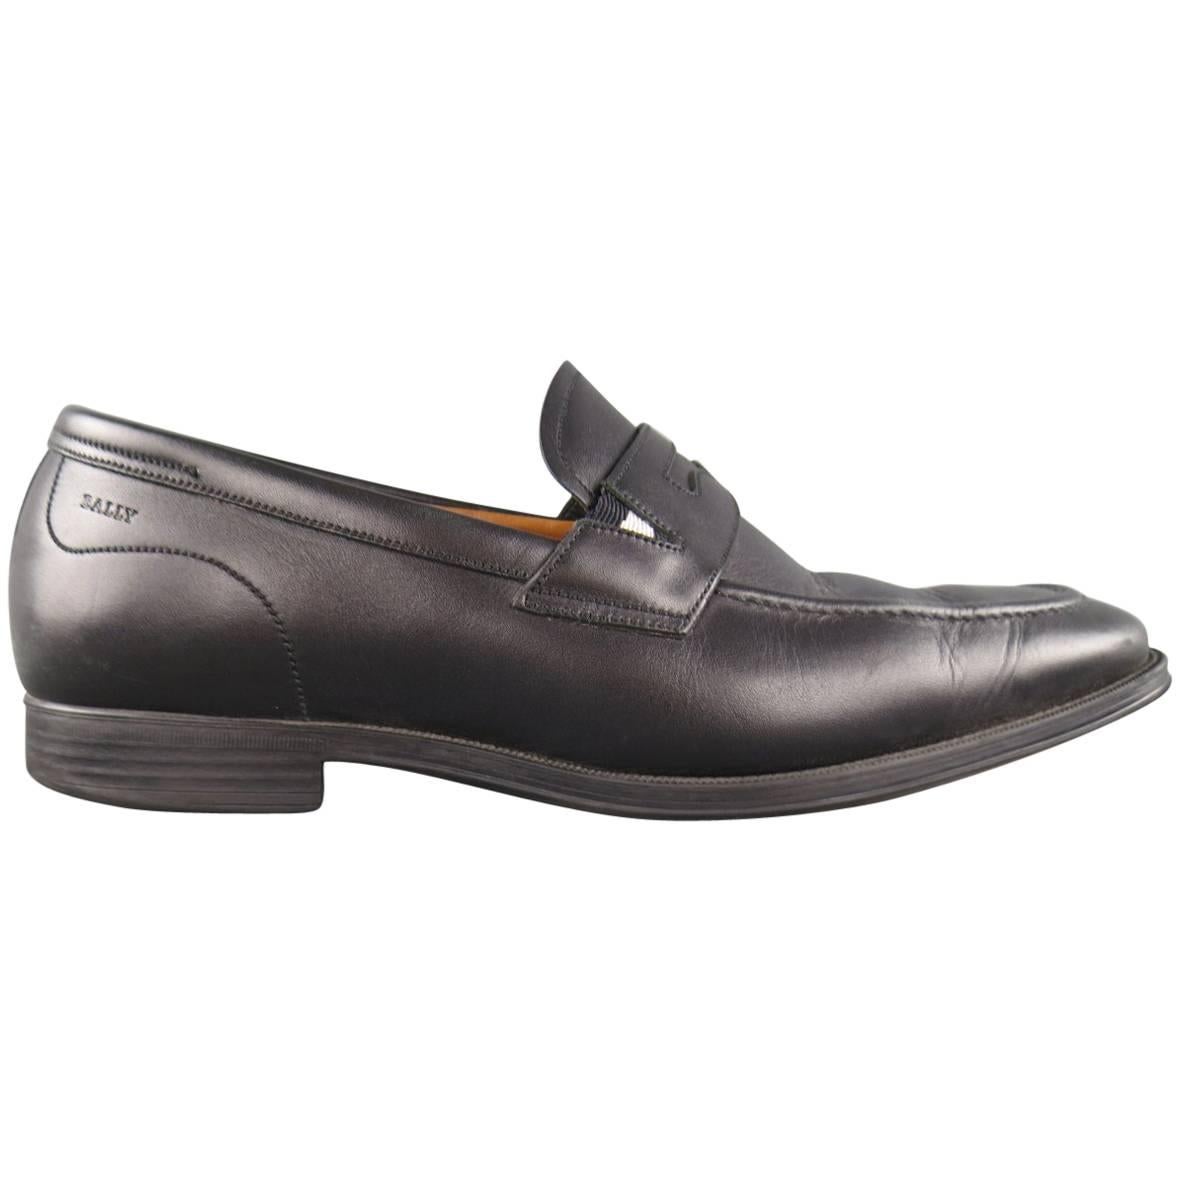 Men's BALLY Size 7.5 Black Leather Penny Loafers